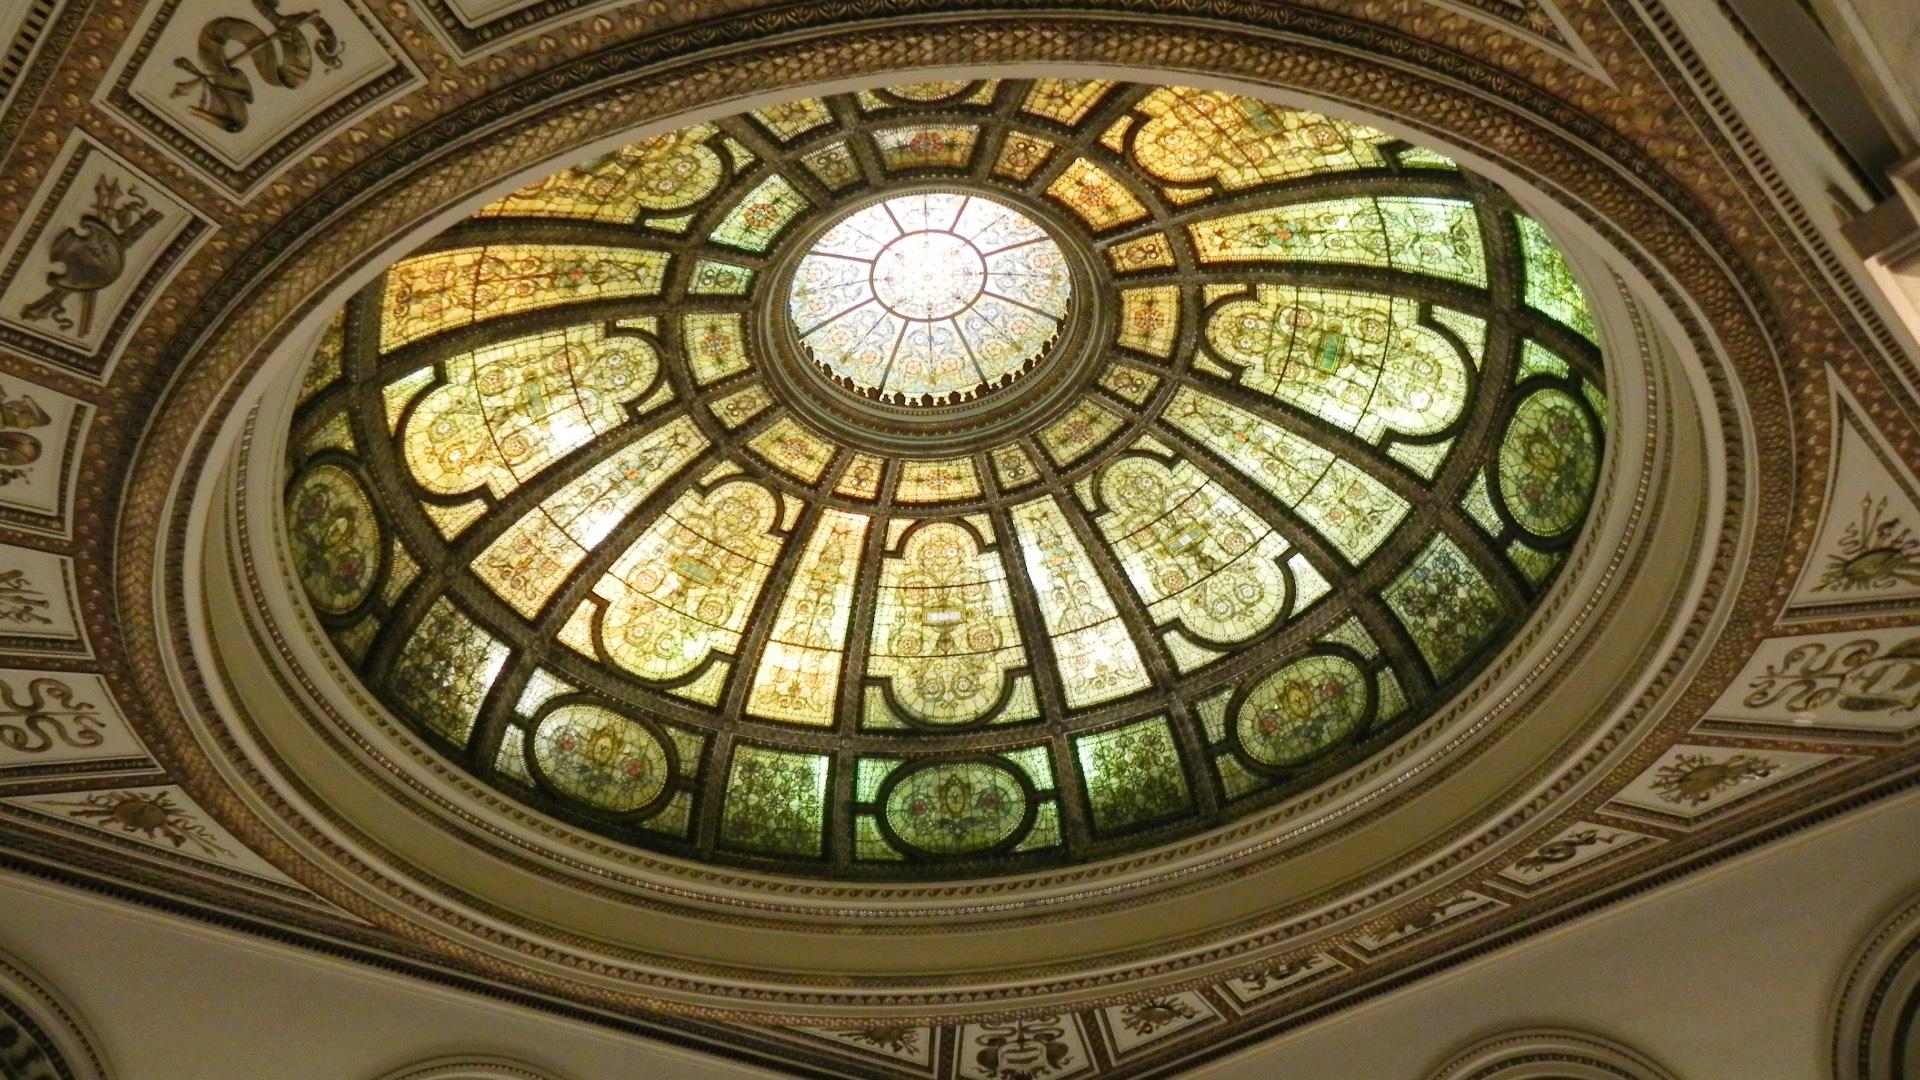 The G.A.R. dome is one of two designed by Louis Comfort Tiffany for the Cultural Center. (Courtesy Department of Cultural Affairs and Special Events)